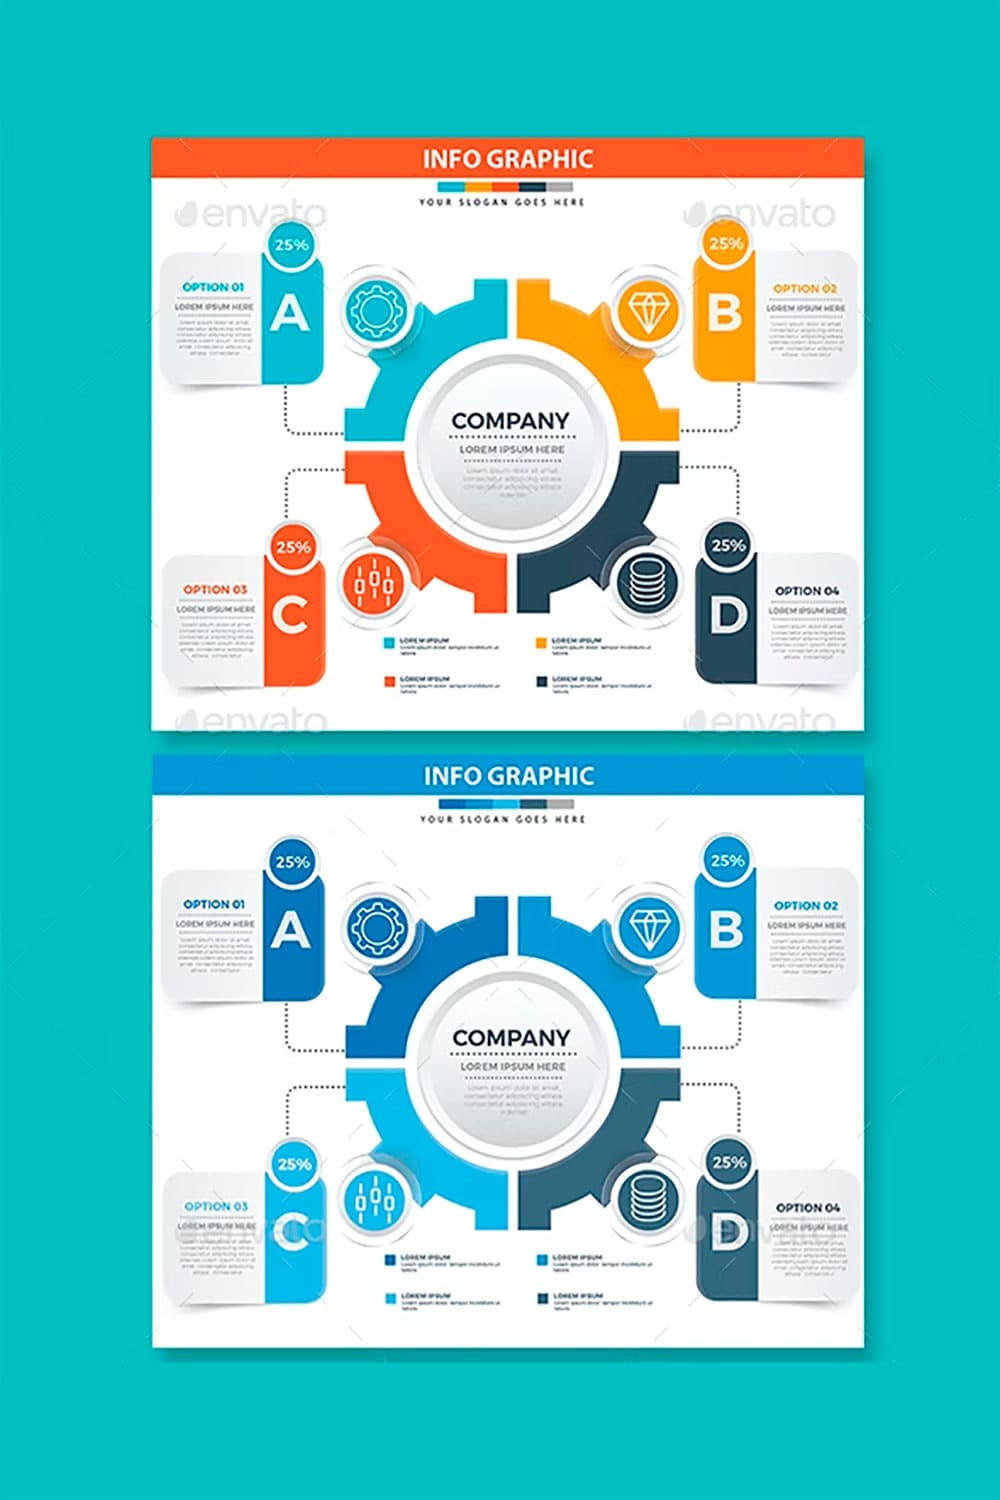 Infographics design on a turquoise background, picture for pinterest.